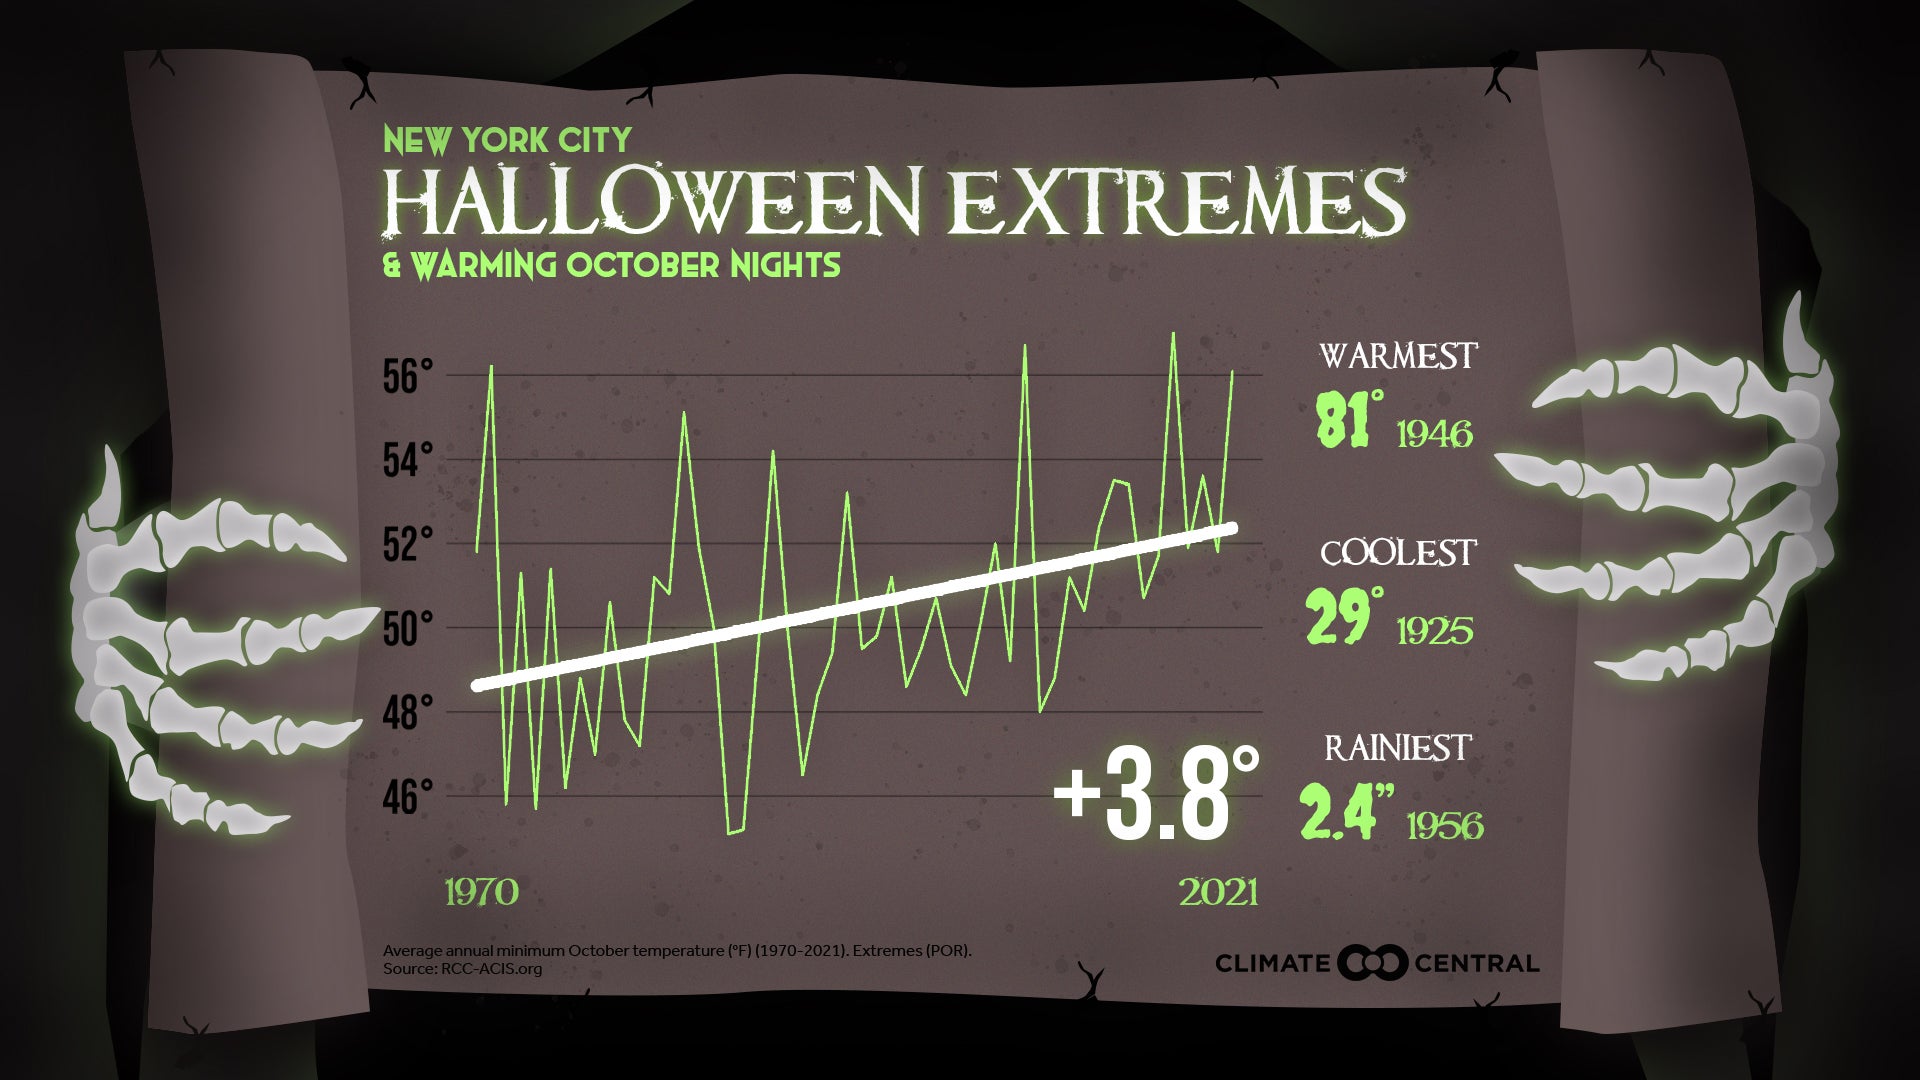 October nights in New York City have gotten hotter over the past 50 years